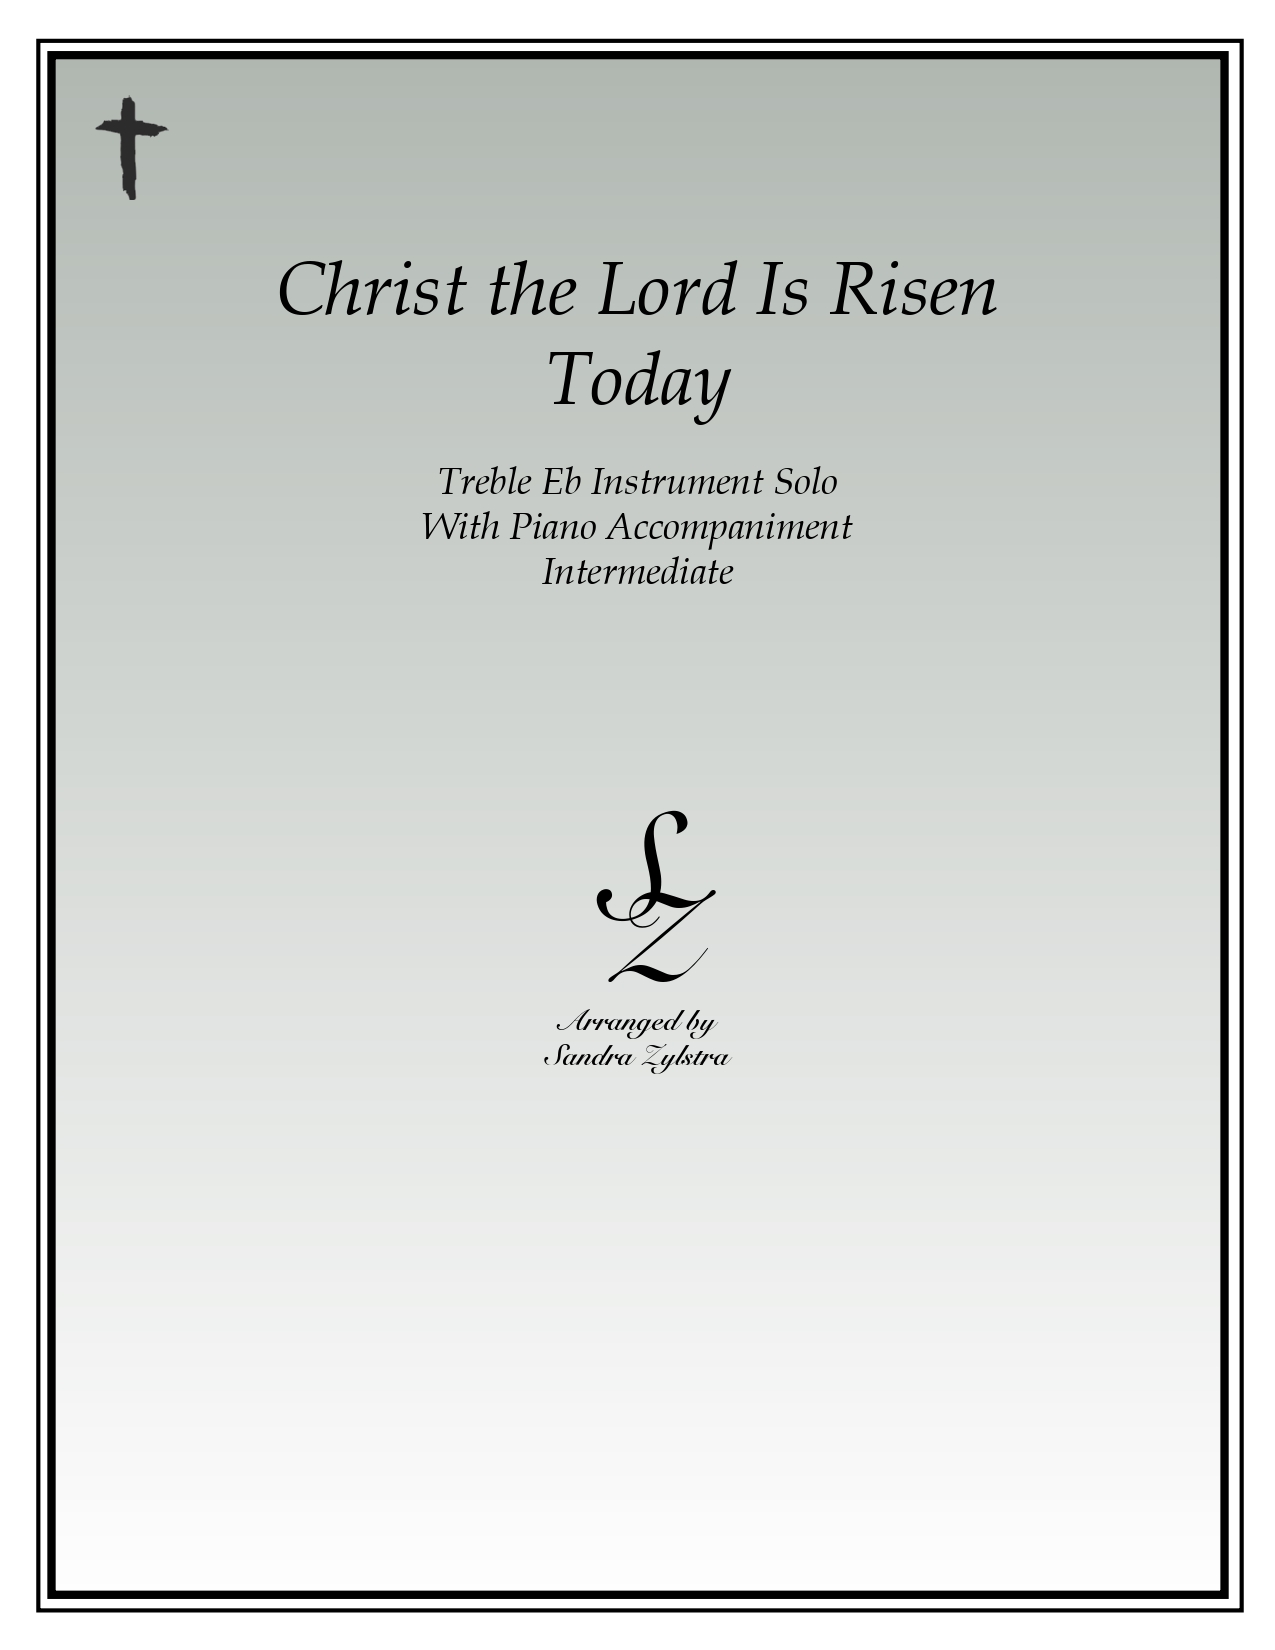 Christ The Lord Is Risen Today Eb instrument solo part cover page 00011